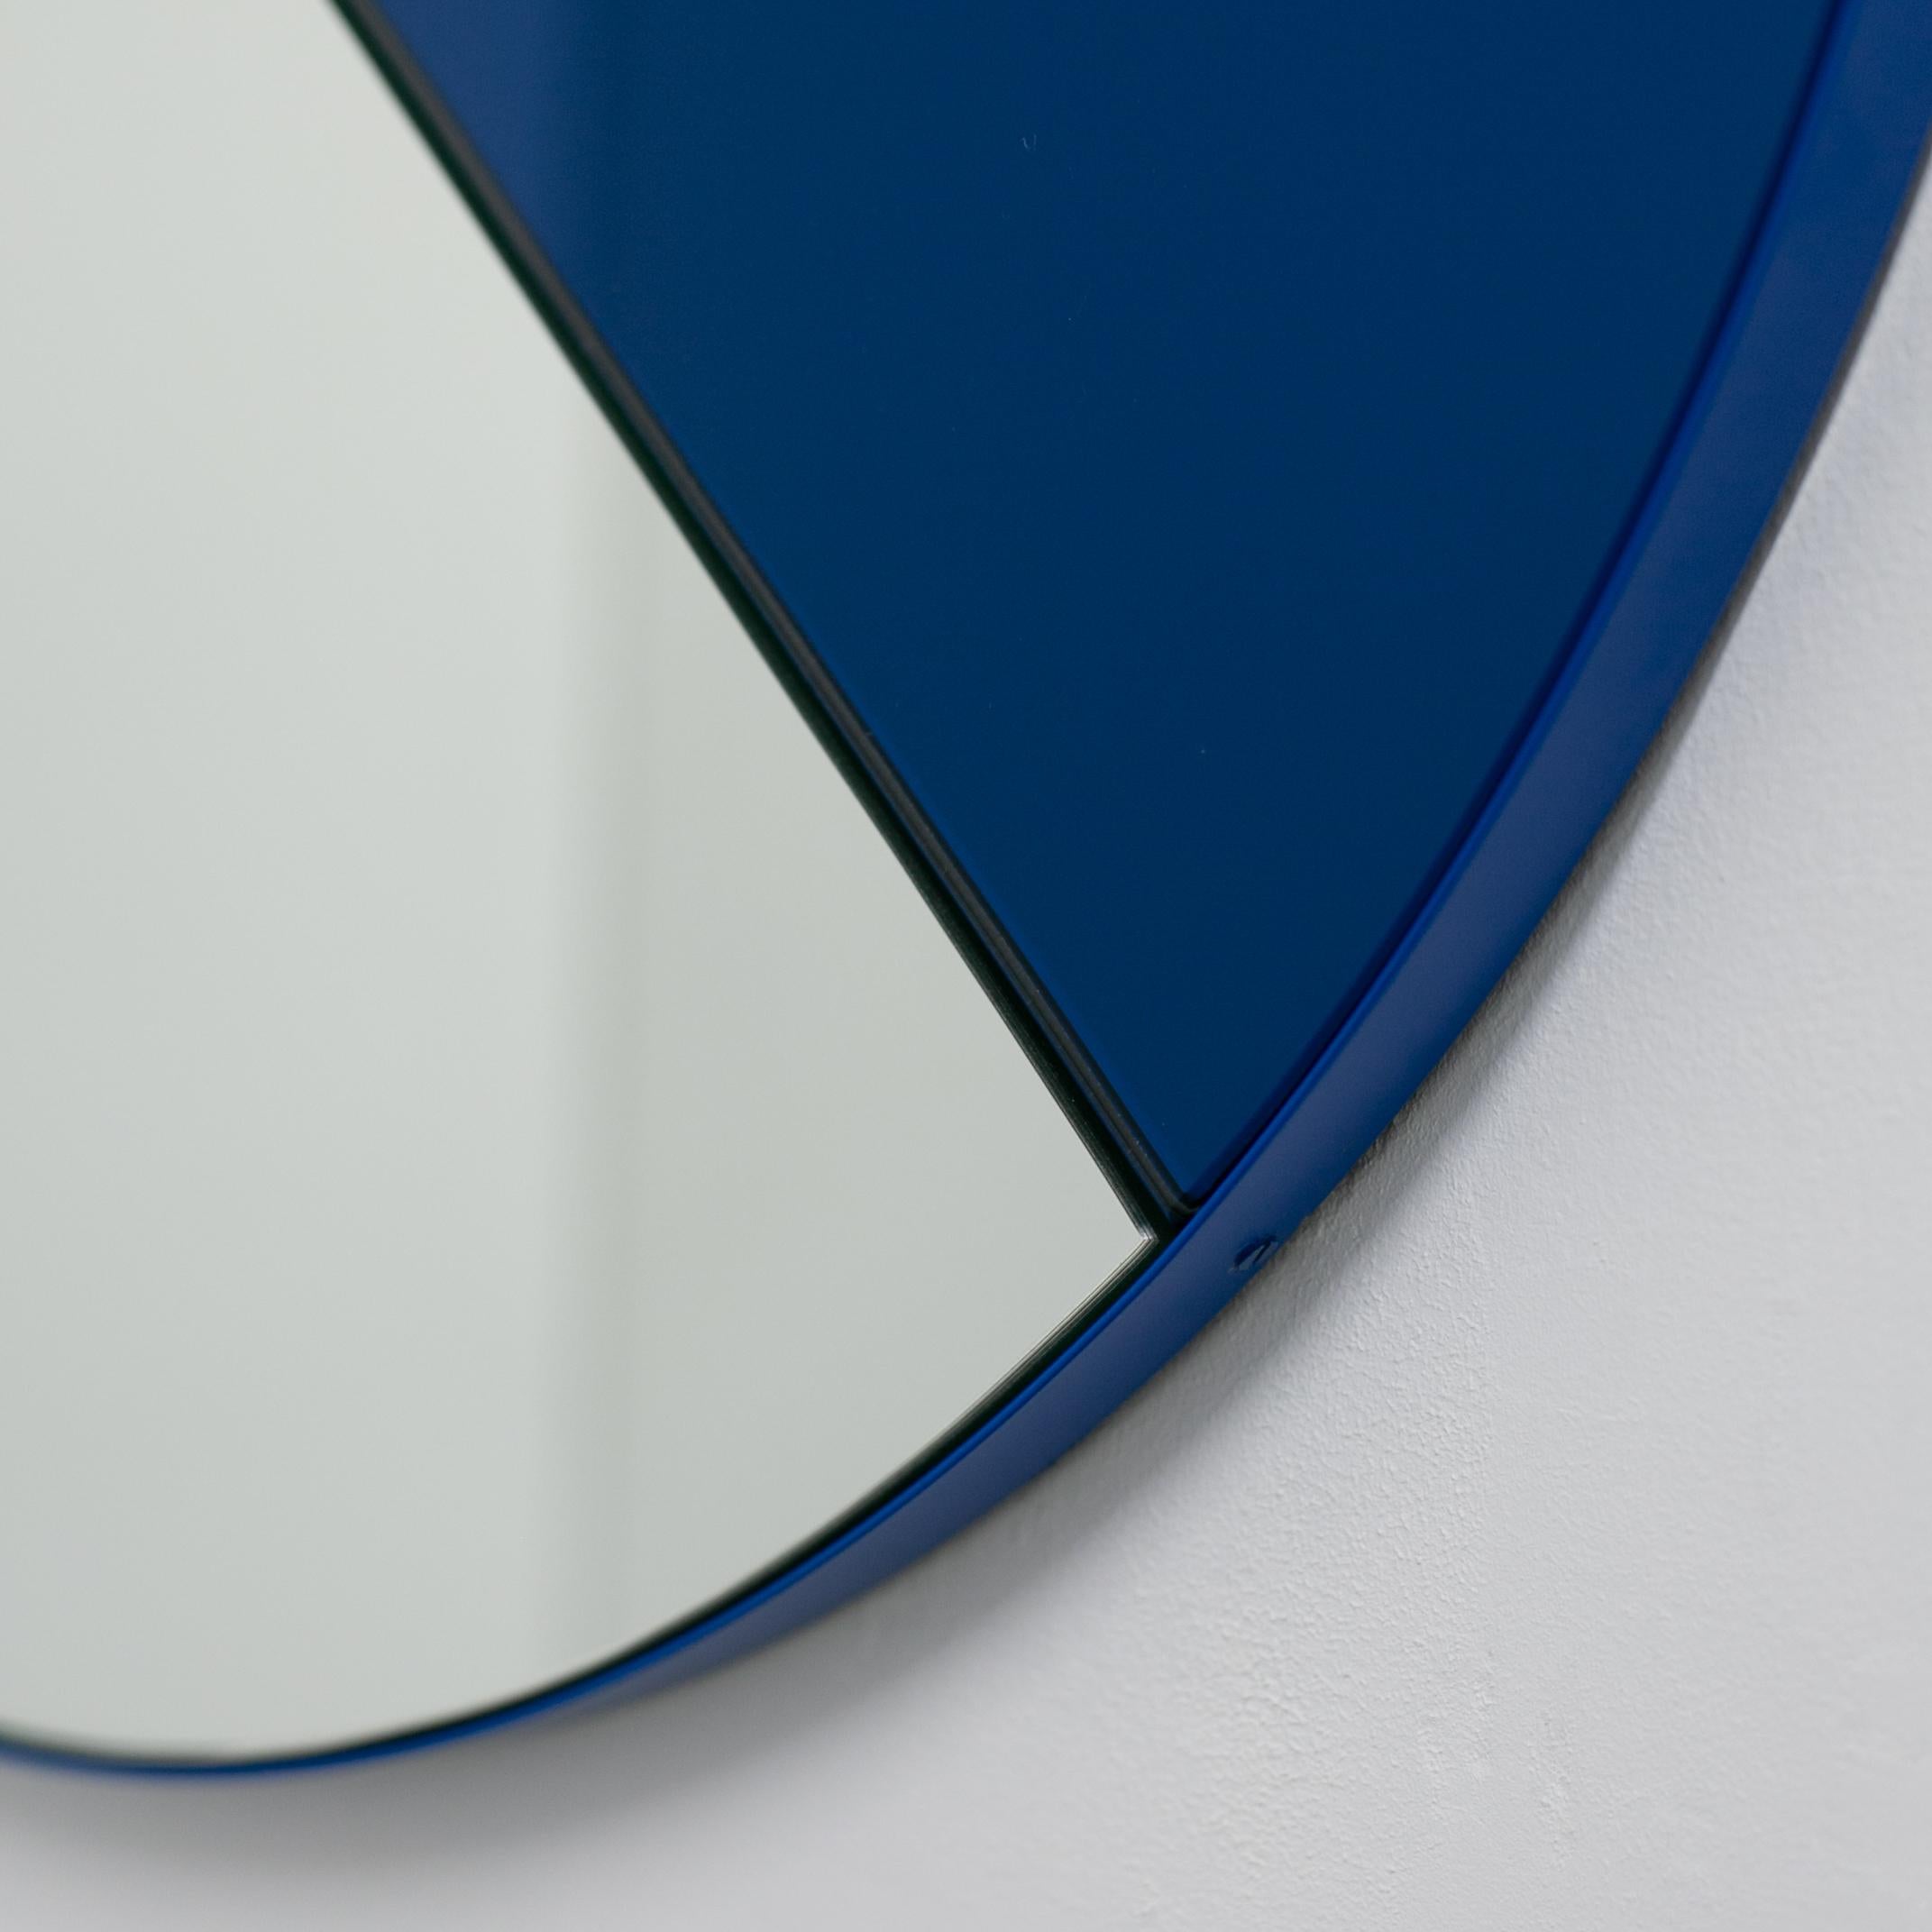 Orbis Dualis Mixed Blue Tinted Contemporary Round Mirror with Blue Frame, Small For Sale 6